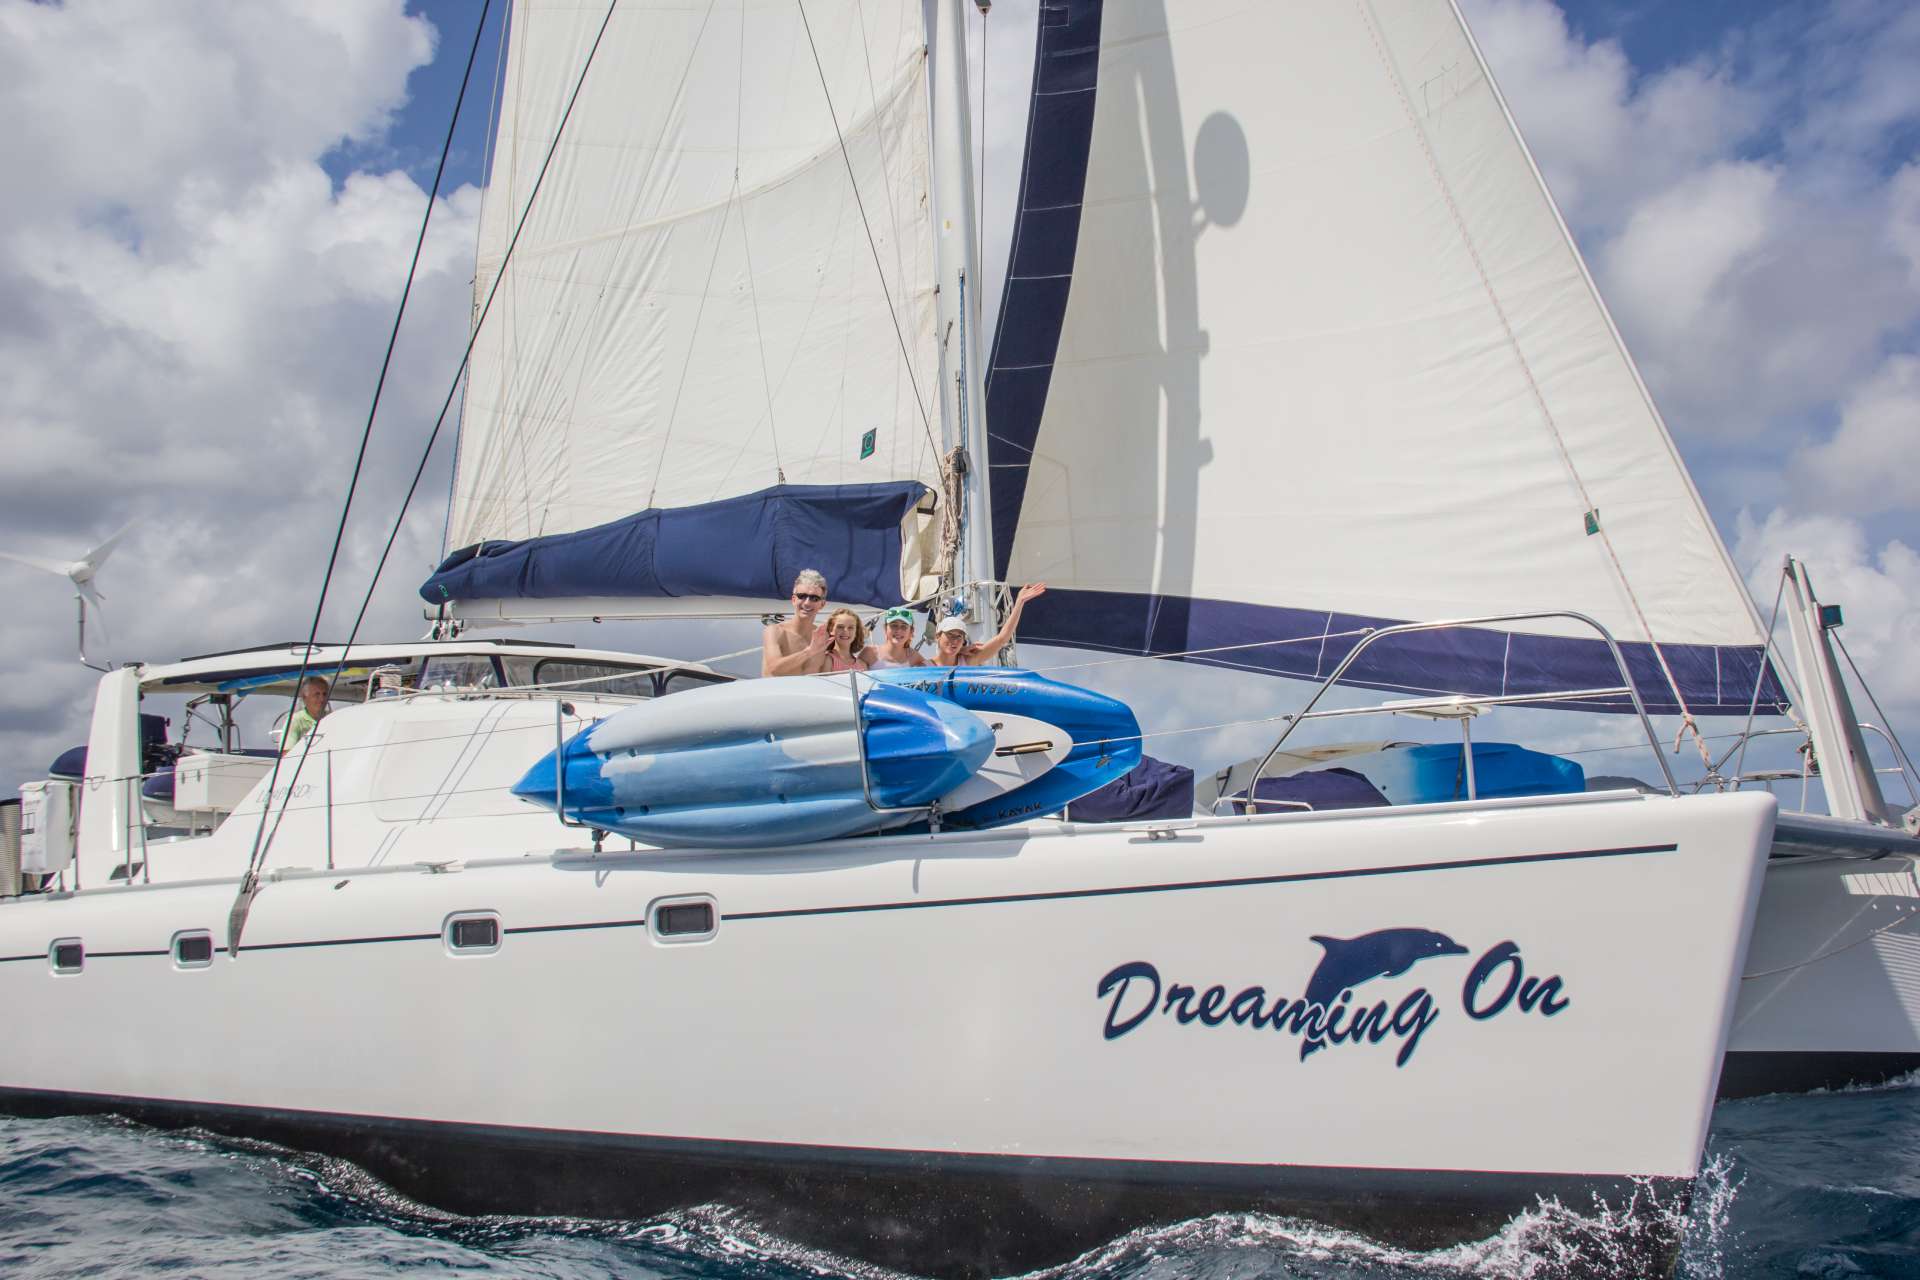 dreaming on - Catamaran charter Jolly Harbour & Boat hire in Central america, Belize 2